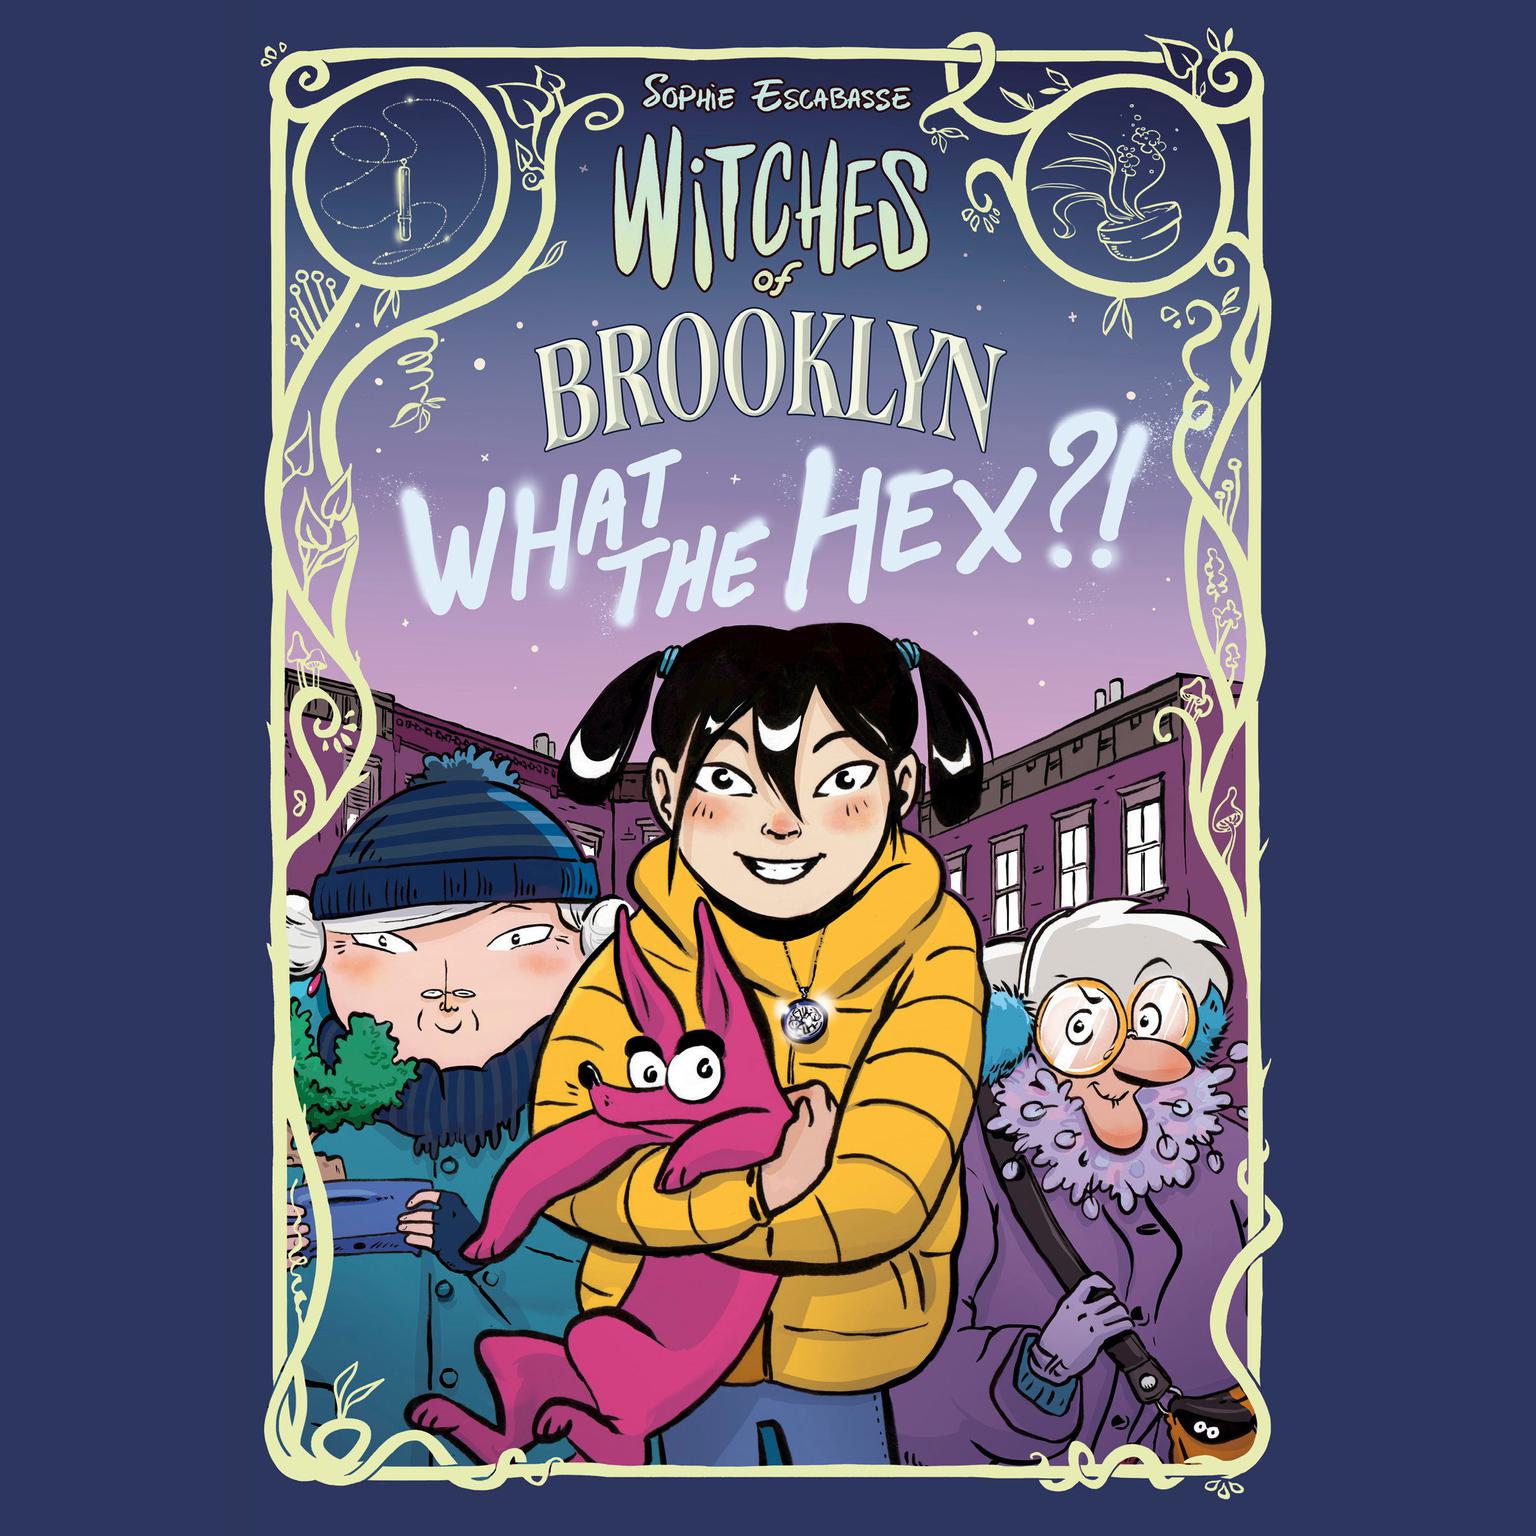 Witches of Brooklyn: What the Hex?!: (A Graphic Novel) Audiobook, by Sophie Escabasse